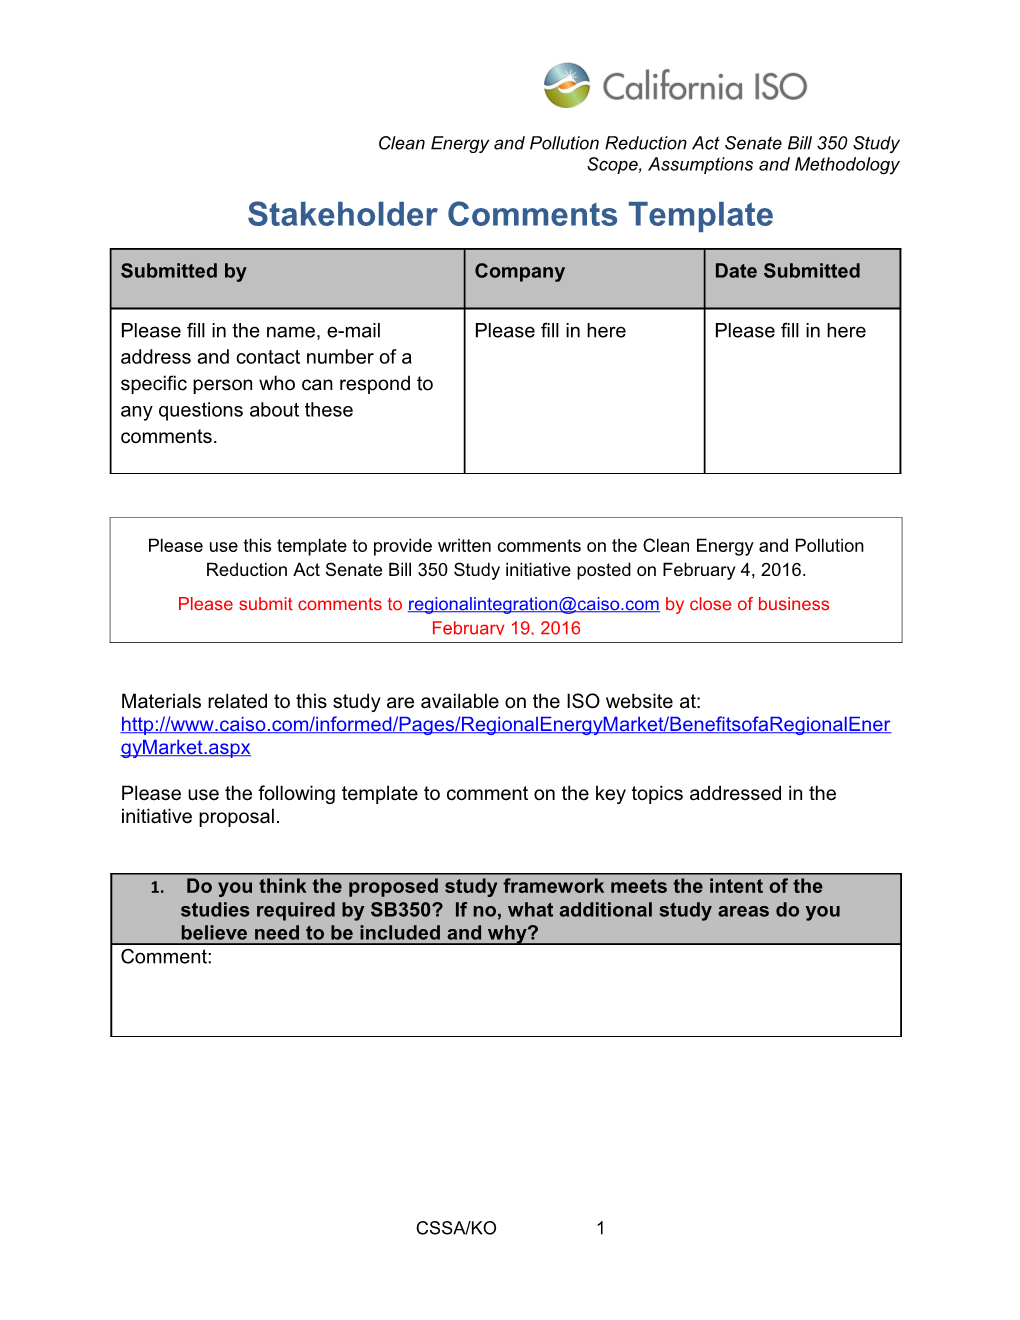 Comments Template - SB350 Study Presentation Materials and Meeting Discussion - Feb 8, 2016